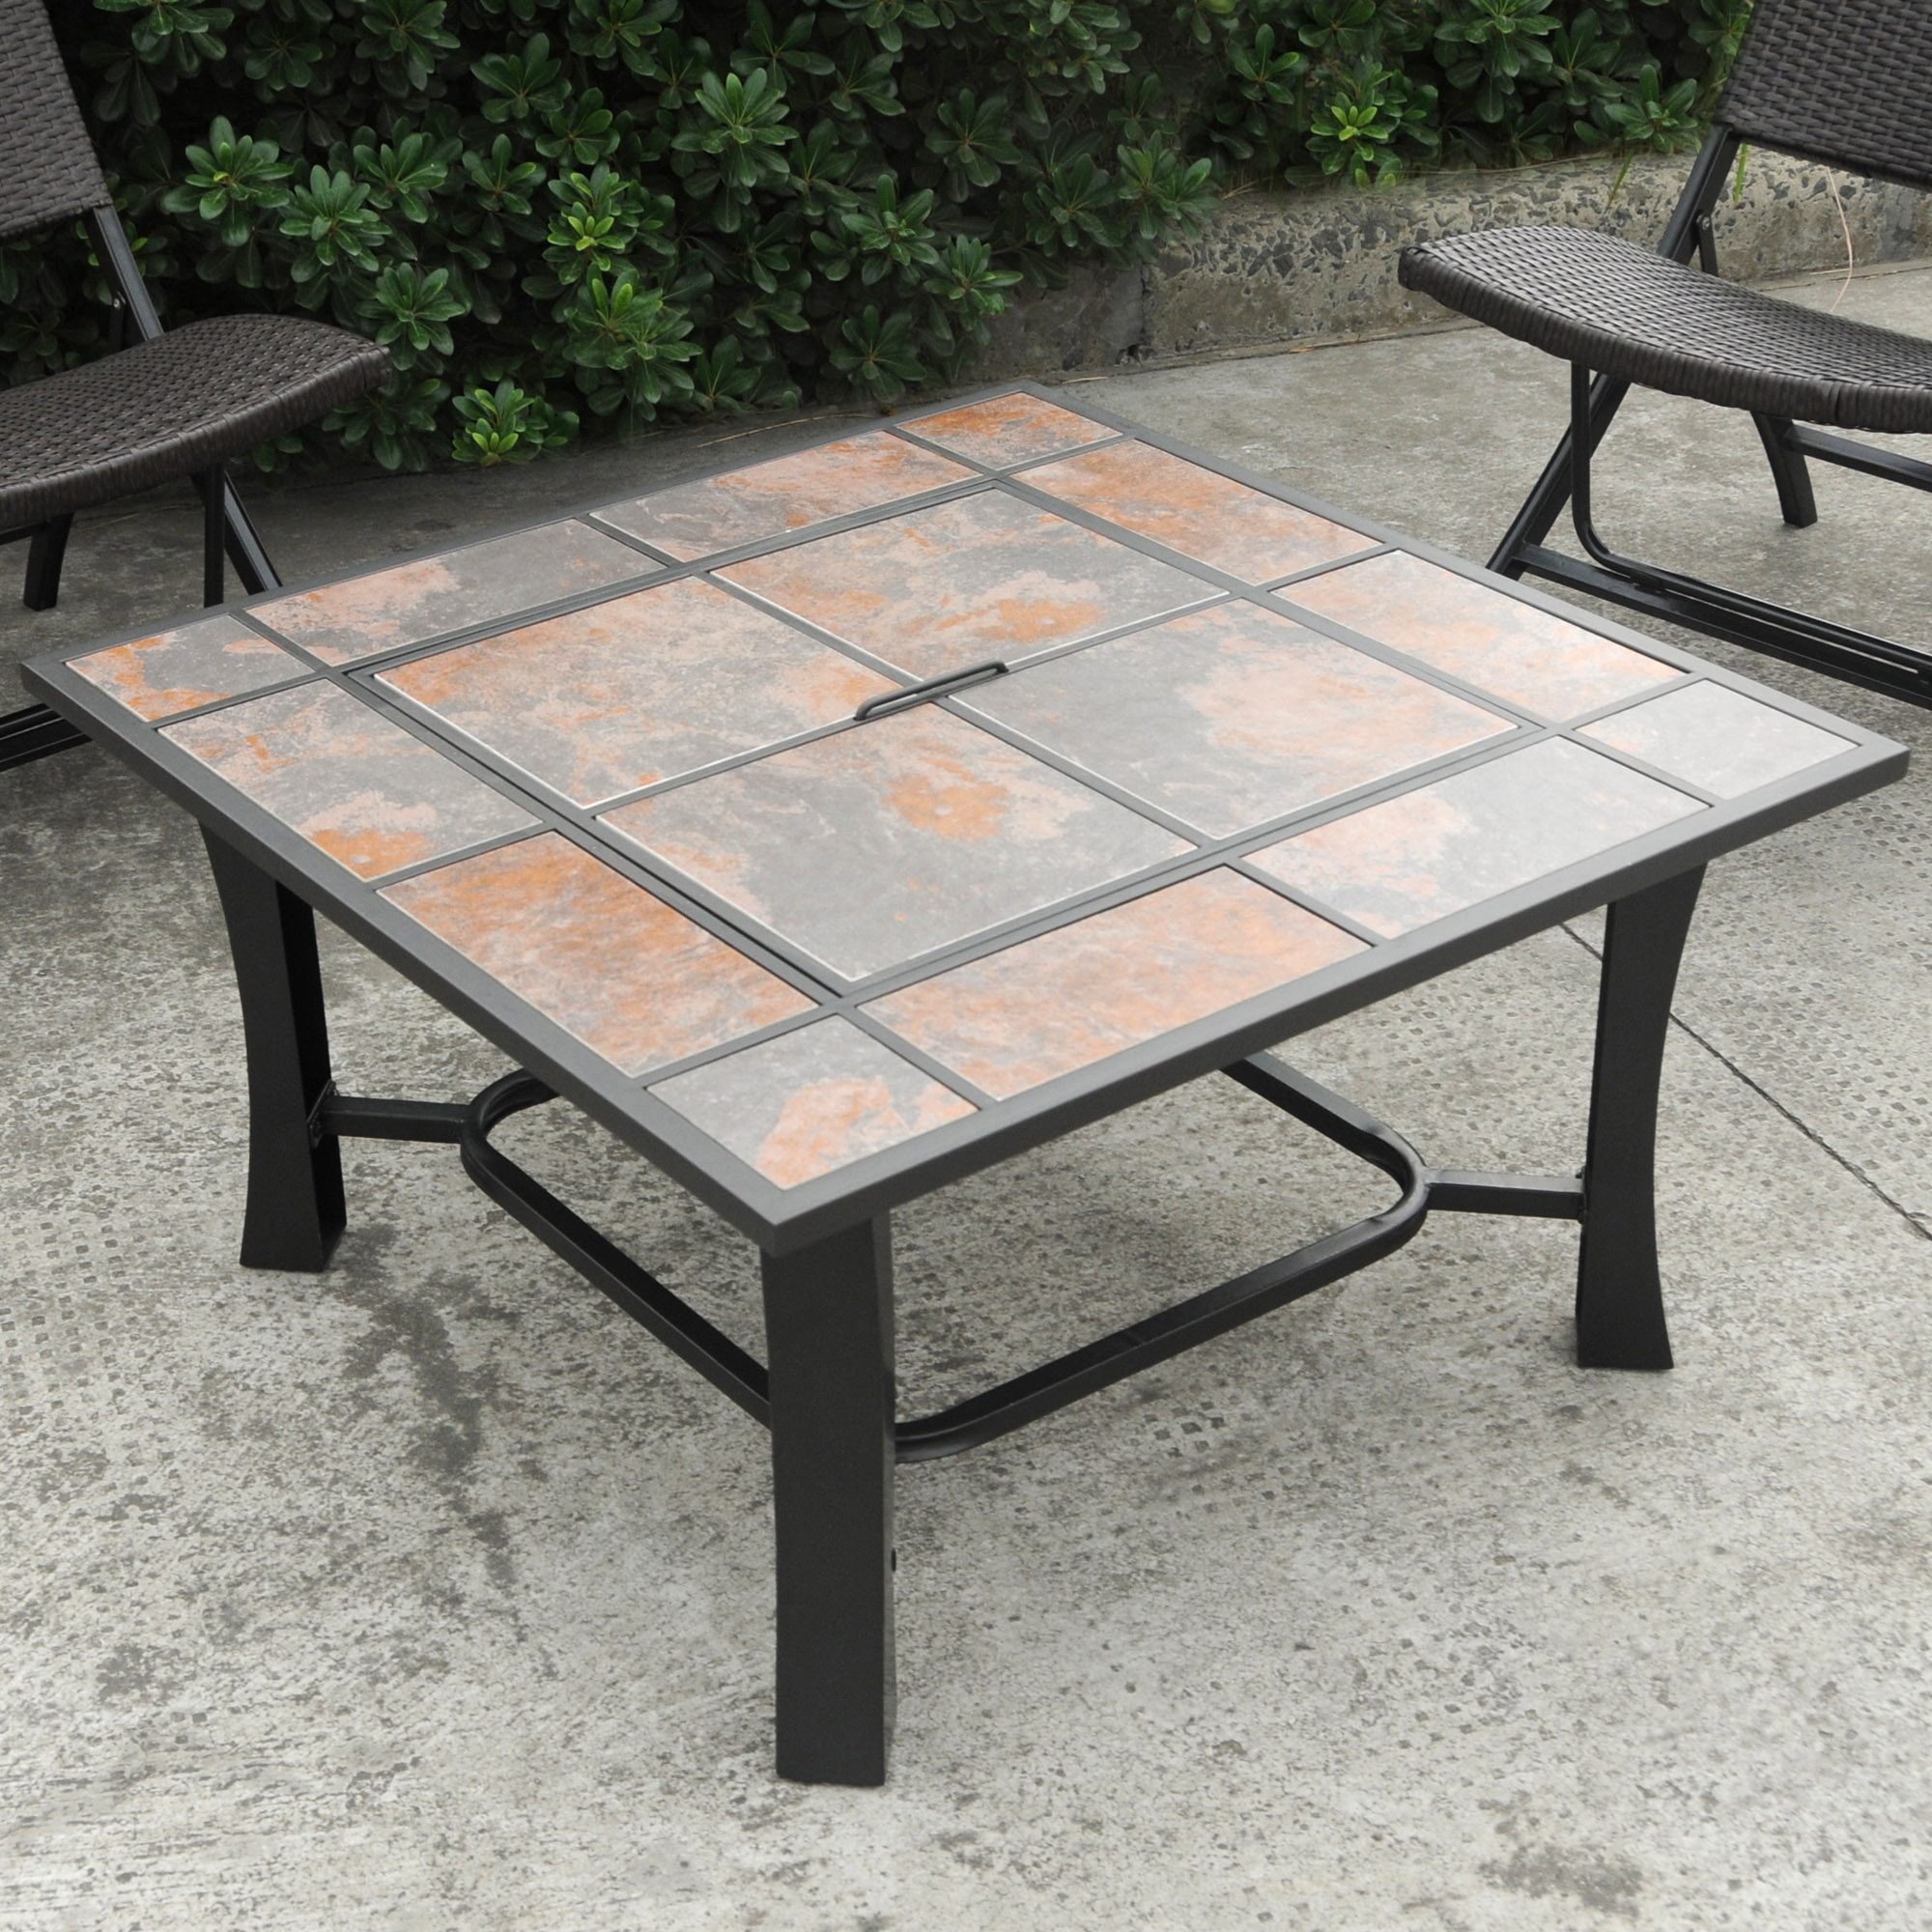 Axxonn 32", 2-in-1 Malaga Convertible Square Tile Top Fire Pit, Coffee Table wood burning Fire Bowl - image 3 of 5